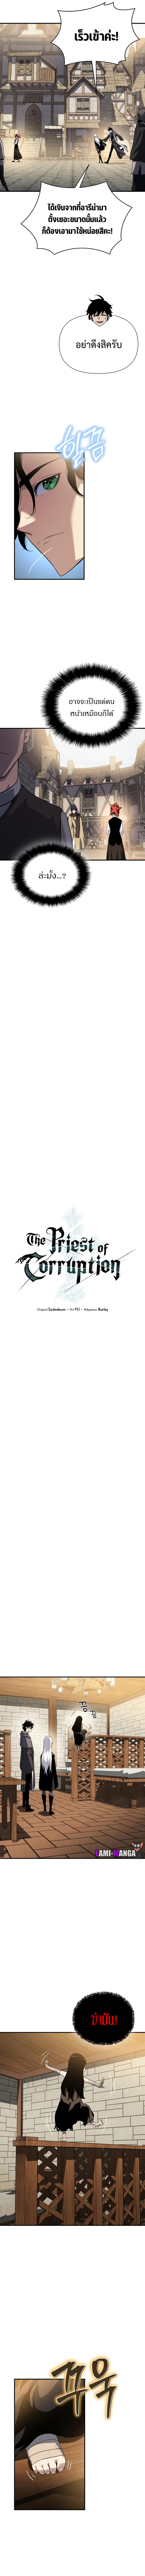 The Priest of Corruption 37 (2)